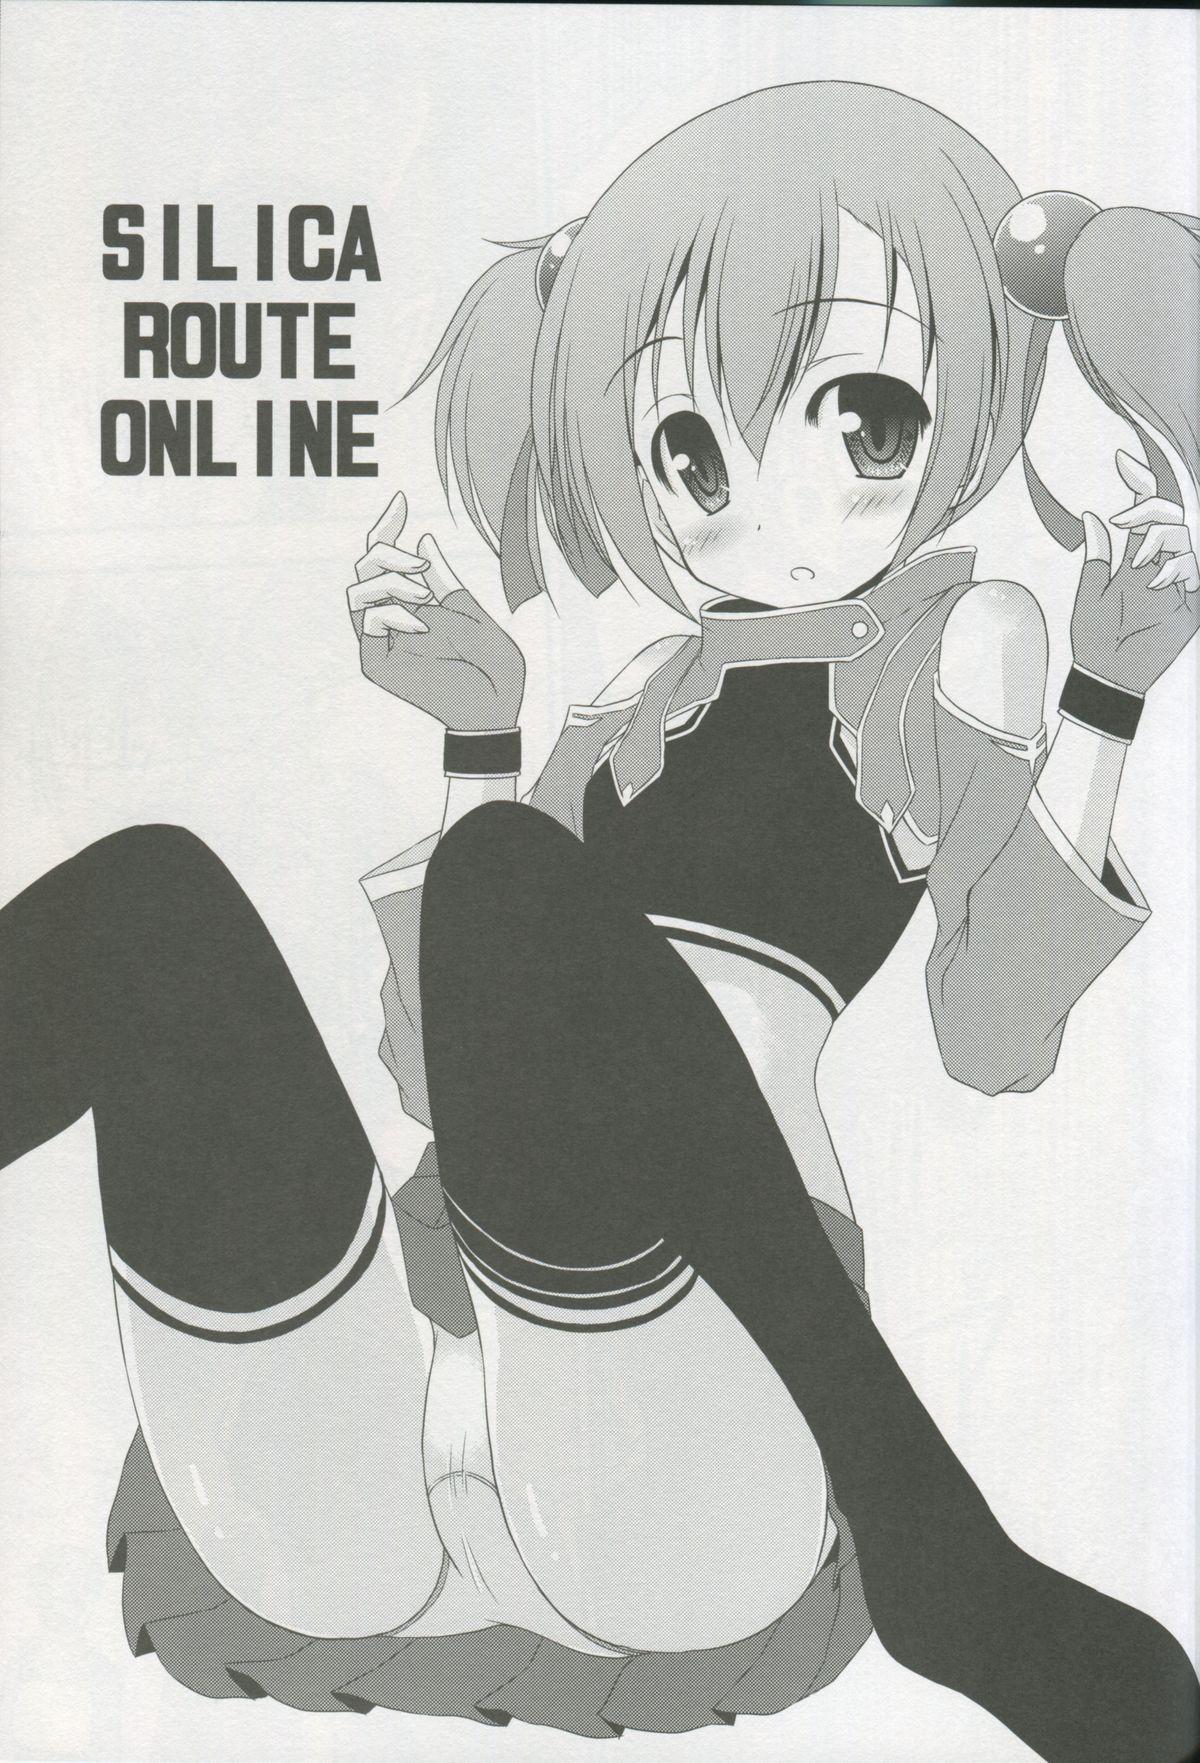 Woman Silica Route Online - Sword art online Gaysex - Page 2